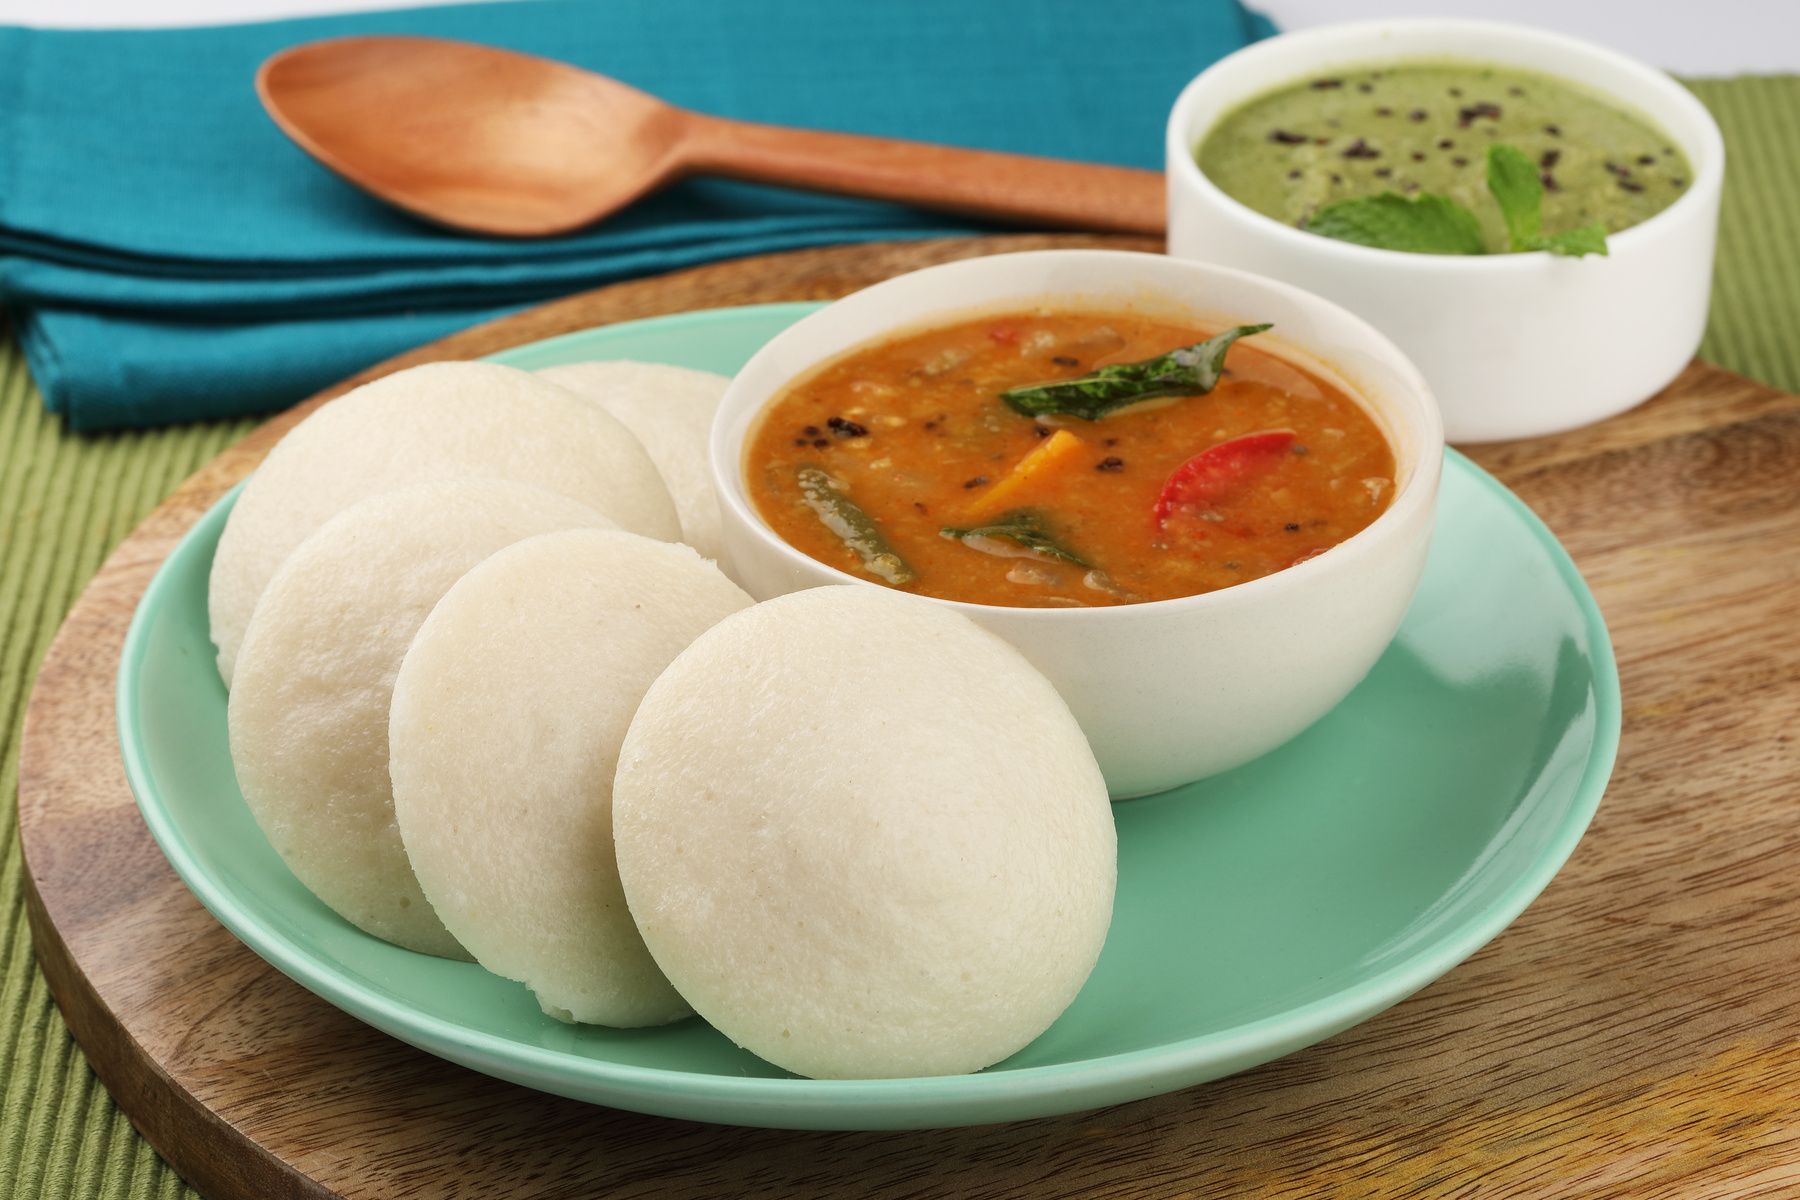 Savour traditional South Indian delight: Idly with flavourful sambhar and coconut chutney